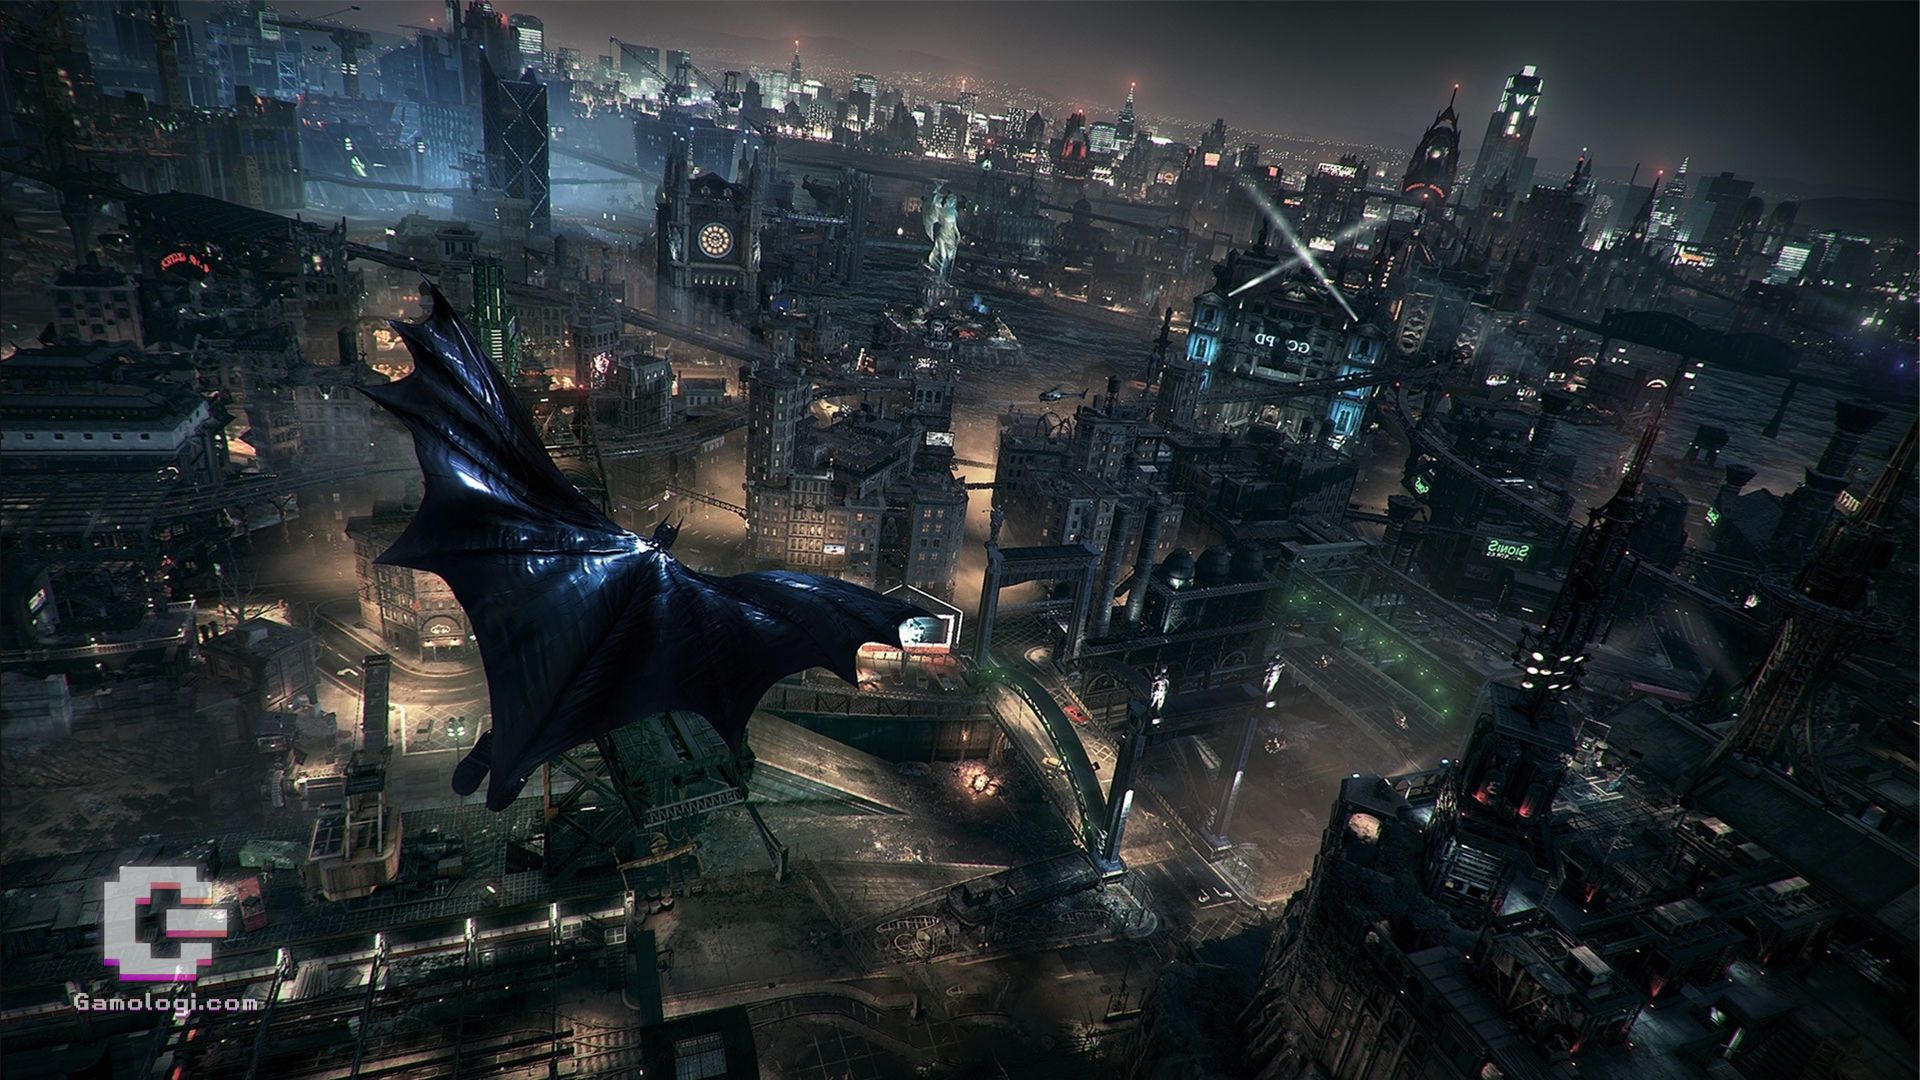 New Batman game of WB games teaser reveals first look at game's